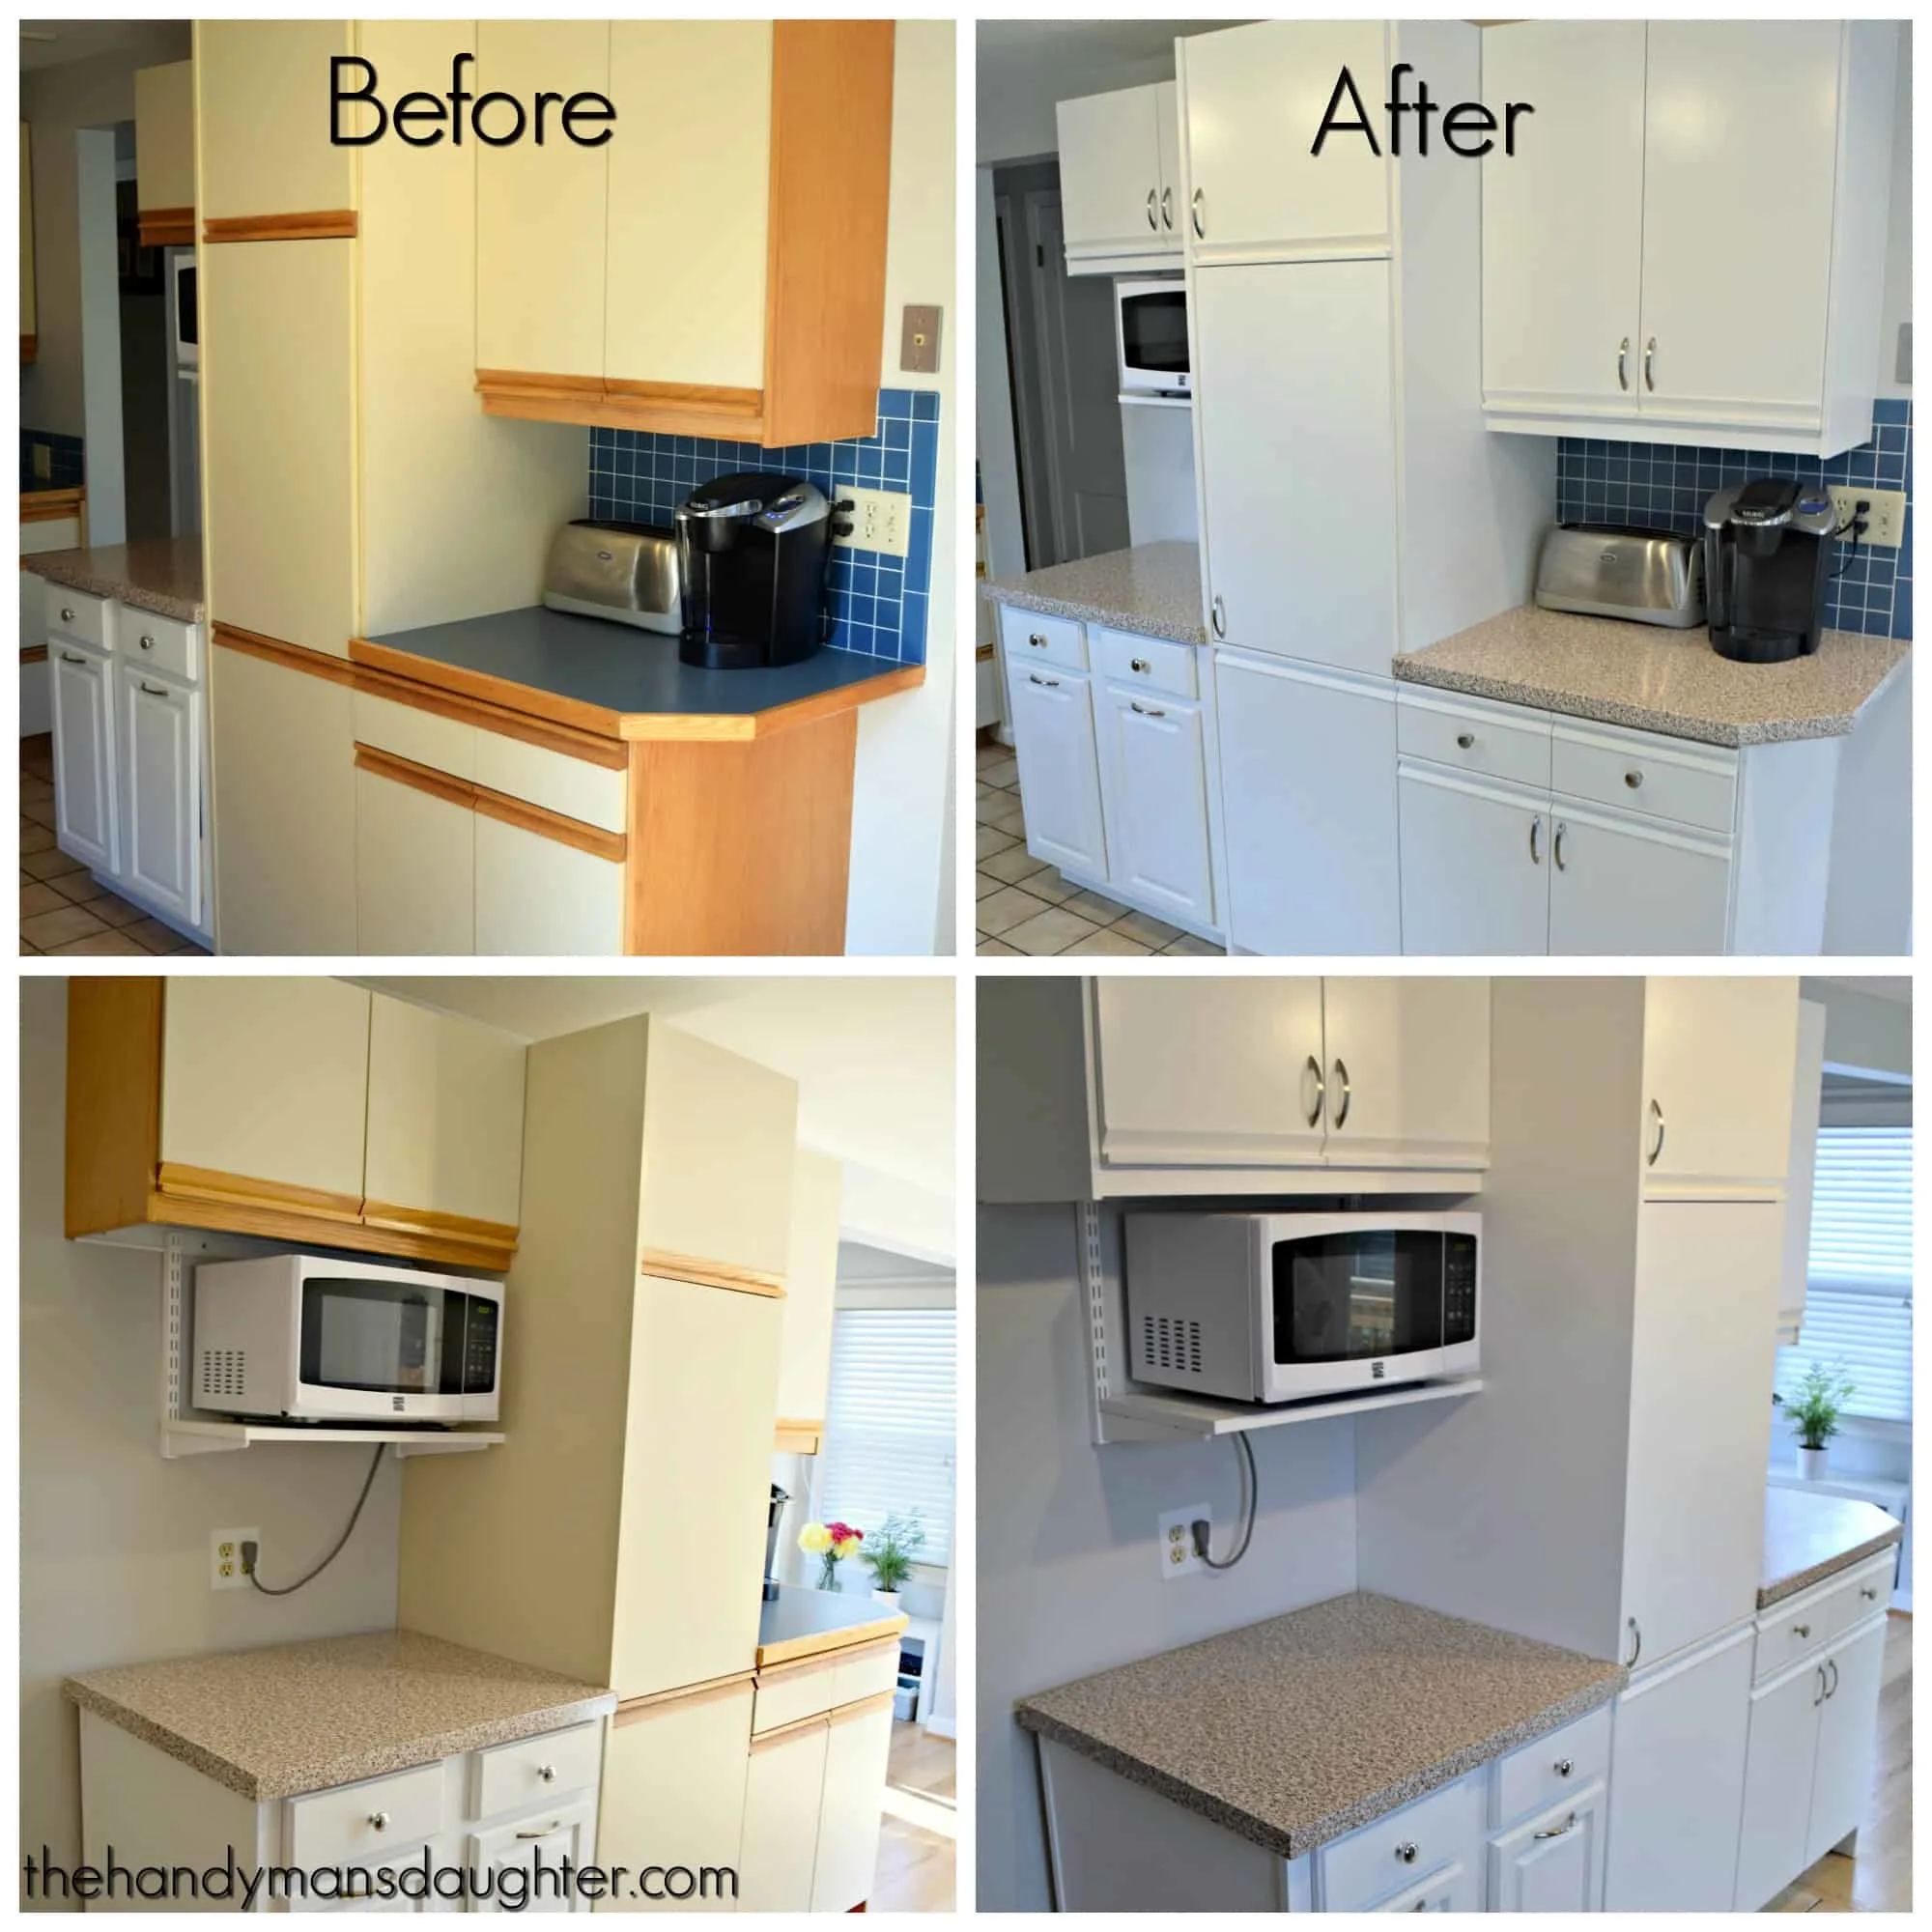 Tips For Updating Melamine Cabinets, How To Paint Laminate Cabinets With Wood Trim